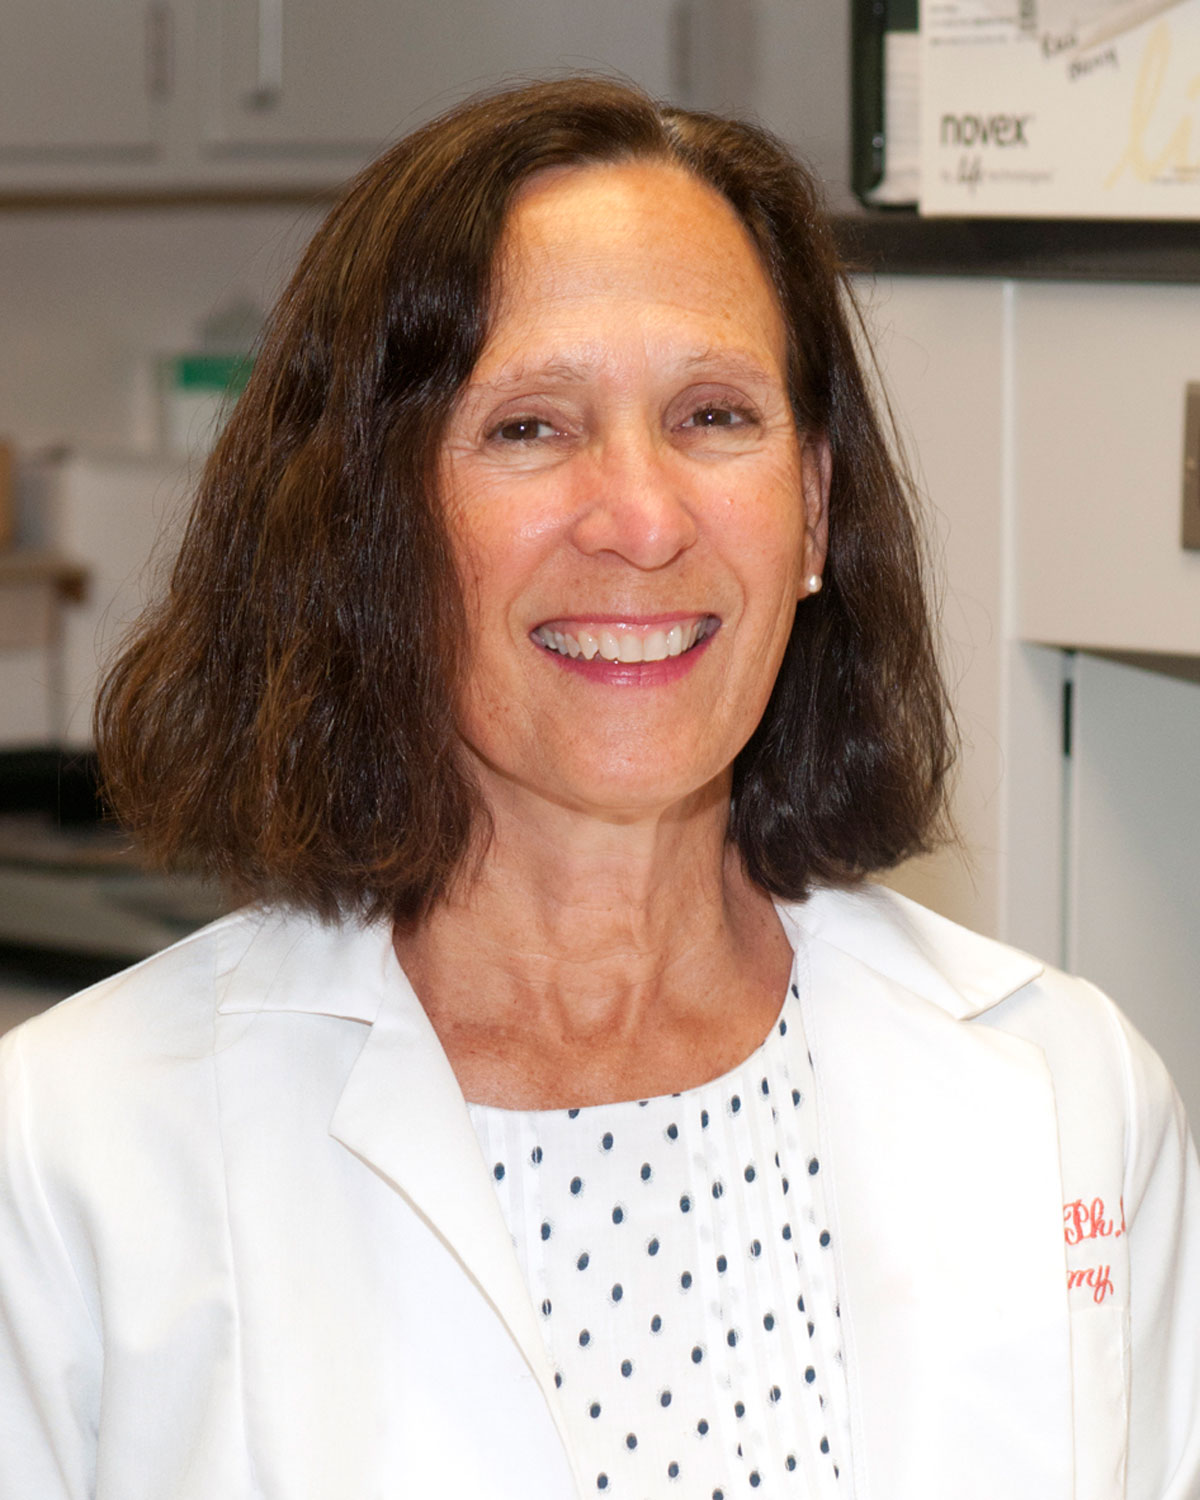 Mindy George-Weinstein, PhD, smiling in her white lab coat in a PCOM laboratory